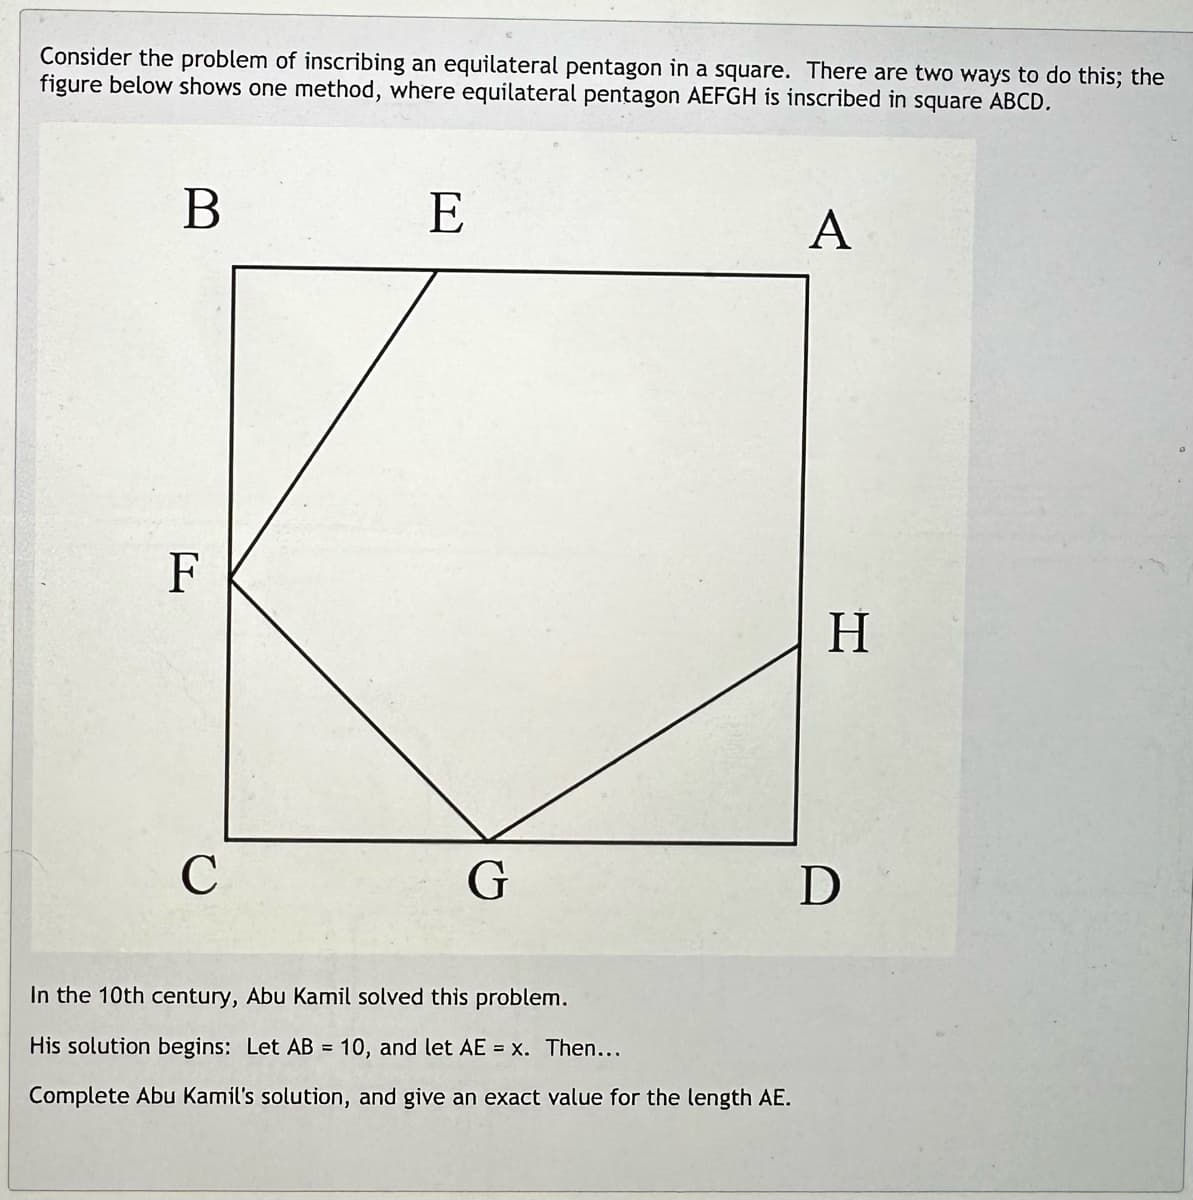 Consider the problem of inscribing an equilateral pentagon in a square. There are two ways to do this; the
figure below shows one method, where equilateral pentagon AEFGH is inscribed in square ABCD.
B
F
C
E
G
In the 10th century, Abu Kamil solved this problem.
His solution begins: Let AB = 10, and let AE = x. Then...
Complete Abu Kamil's solution, and give an exact value for the length AE.
A
H
D